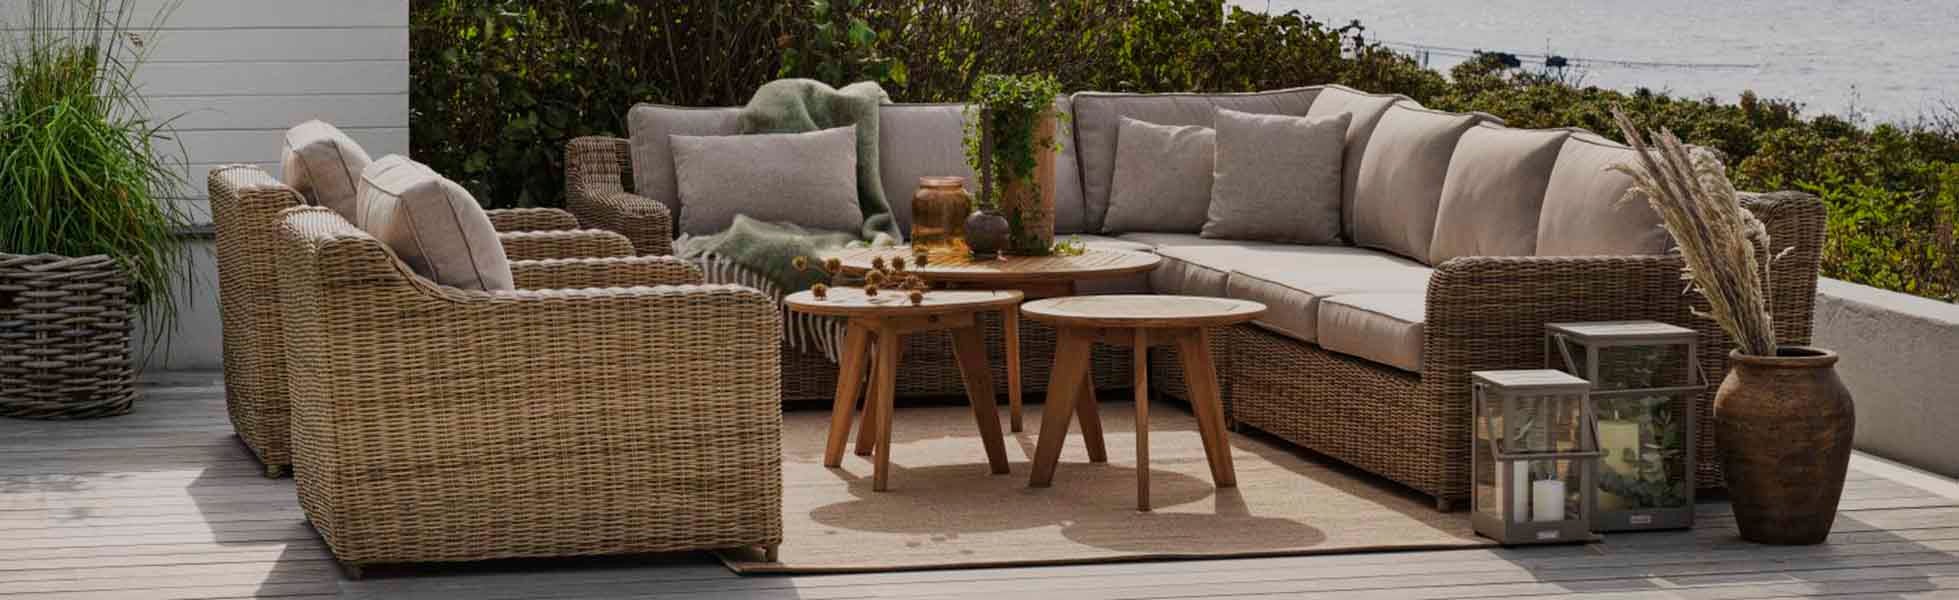 Wonderful Patios For The Outdoor Lover, Nice Outdoor Furniture